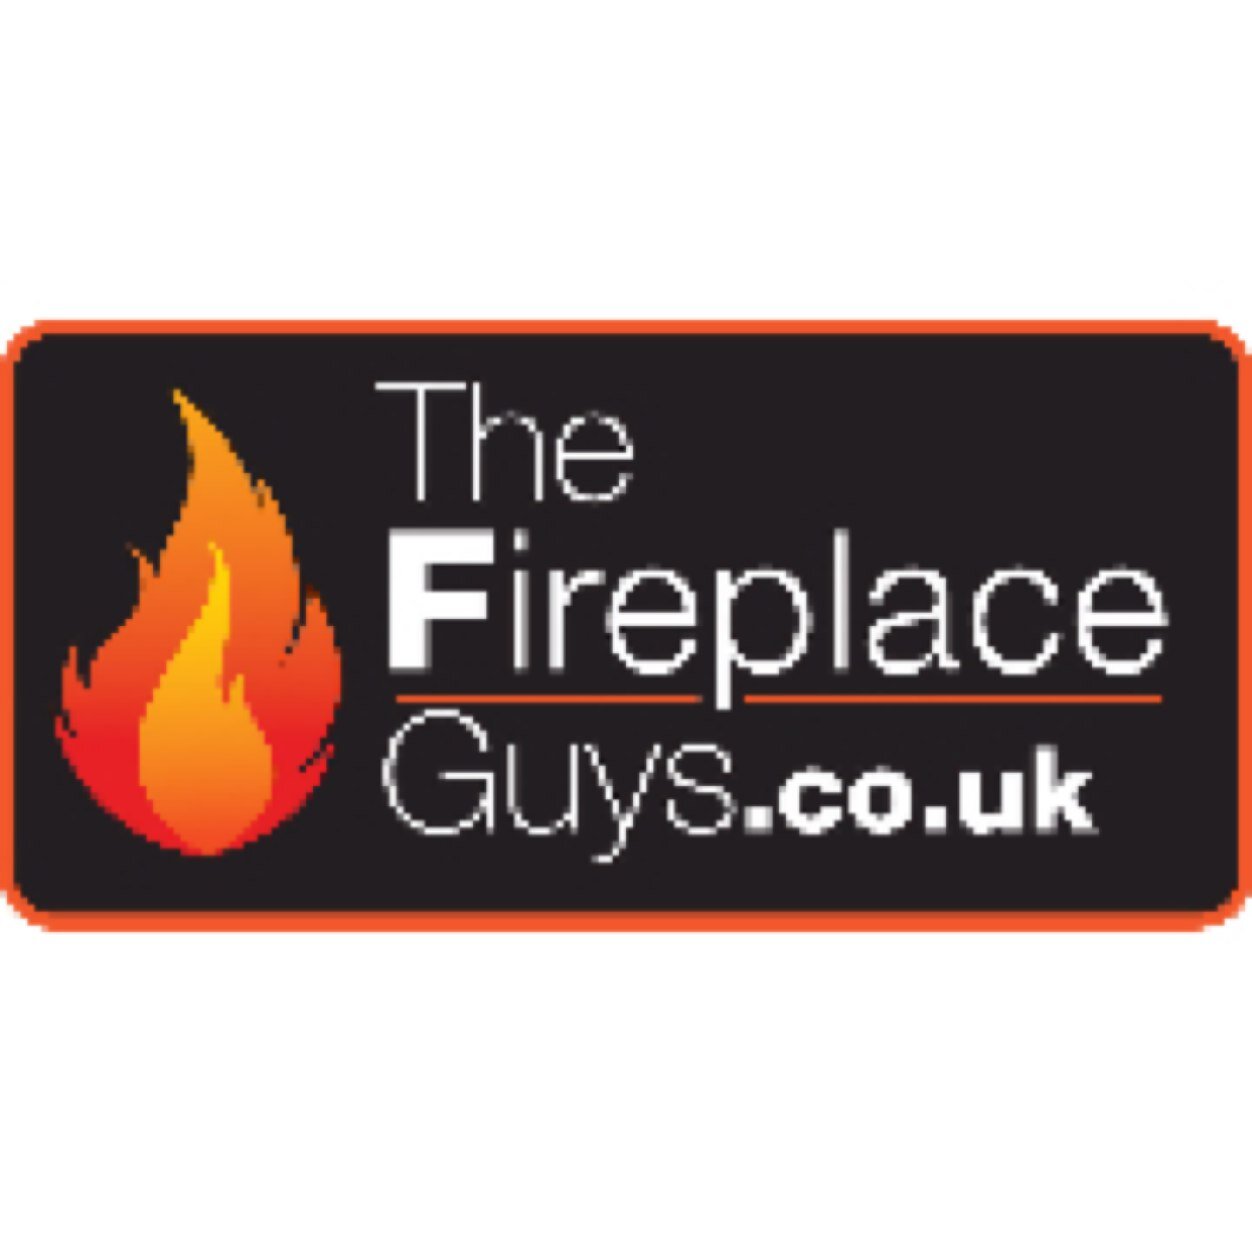 The fireplace guys specialise in hand made wood fire surrounds at great prices! Free delivery on all orders. Visit our website now at http://t.co/RFZirV59Yz